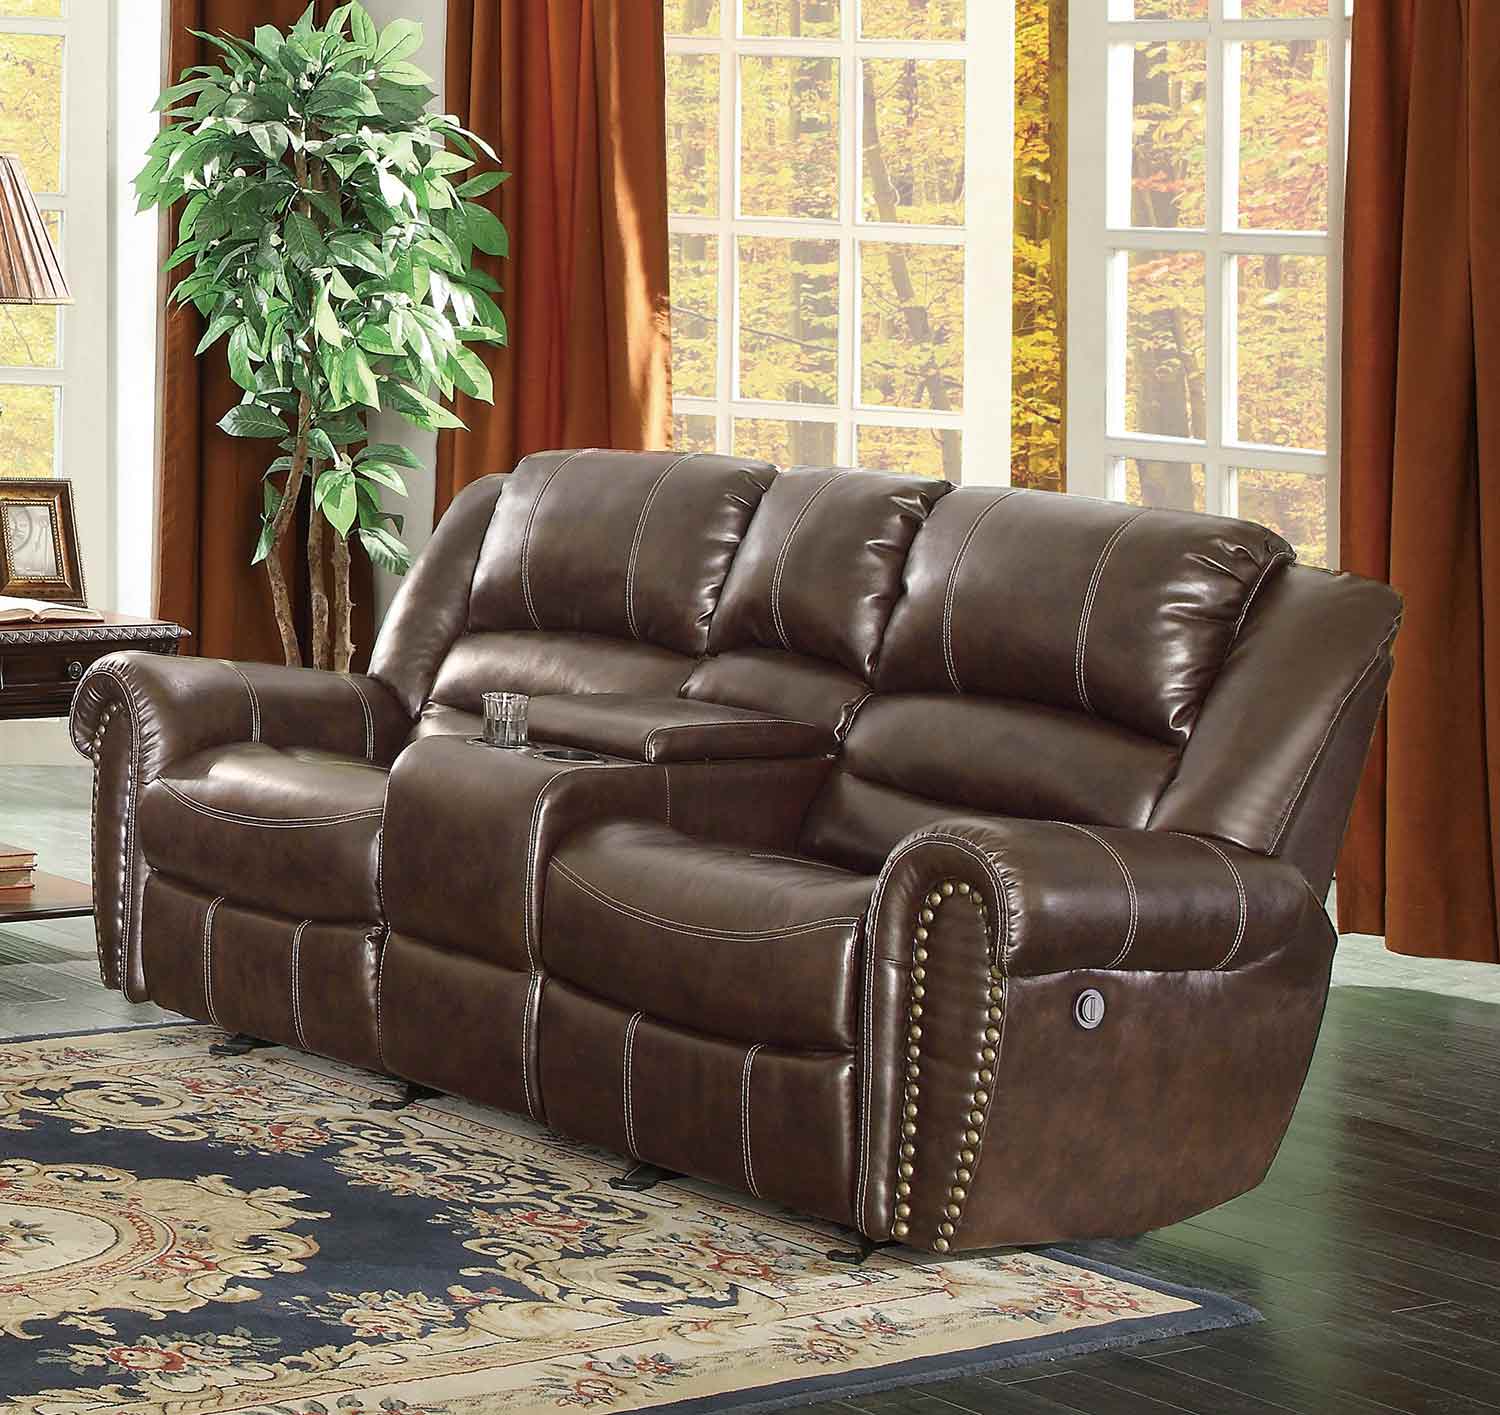 Homelegance Center Hill Power Doubler Reclining Love Seat with Center Console - Dark Brown